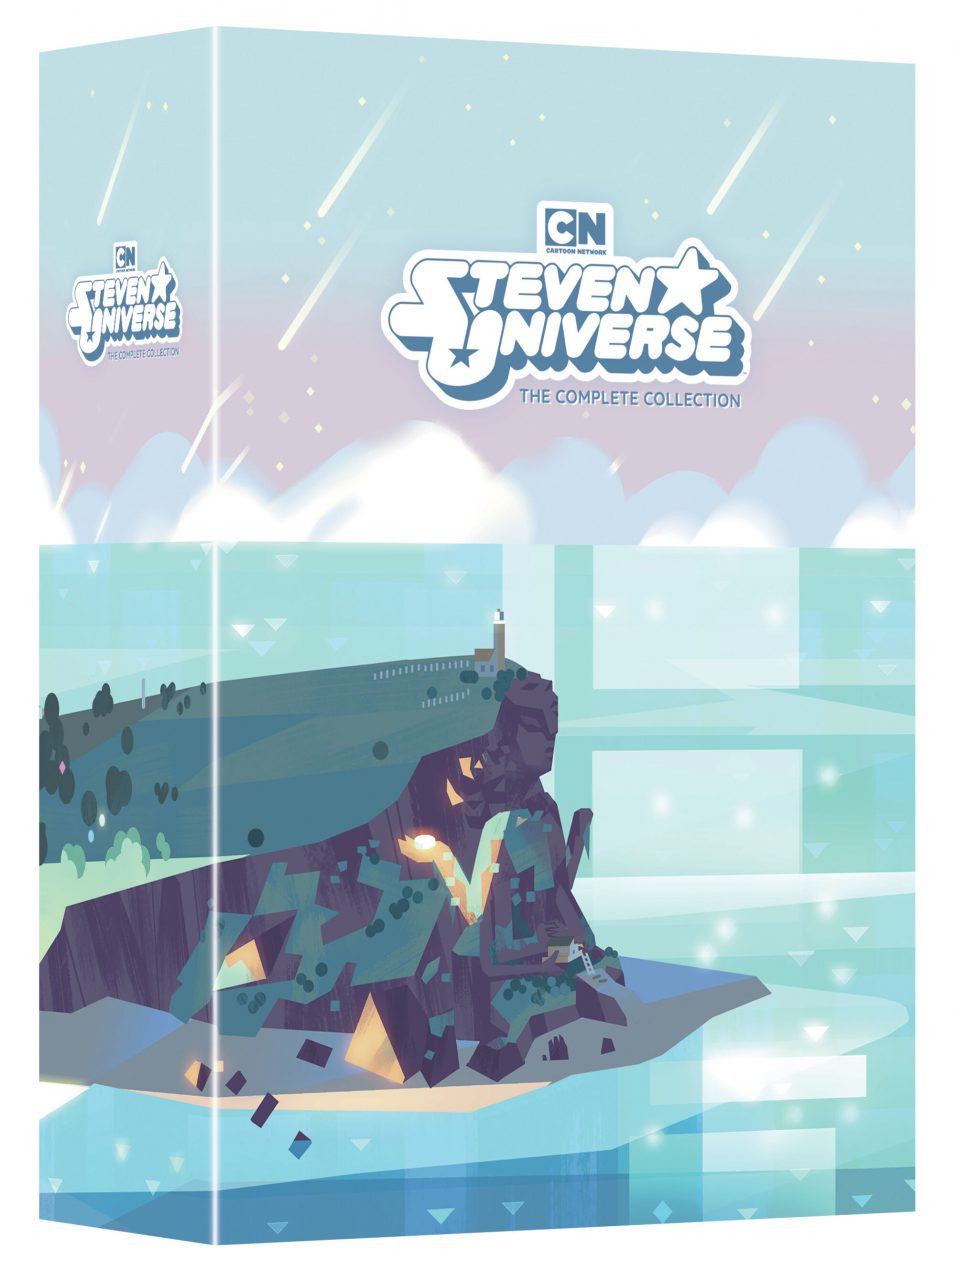 Steven Universe: The Complete Collection DVD cover (Warner Bros. Home Entertainment)